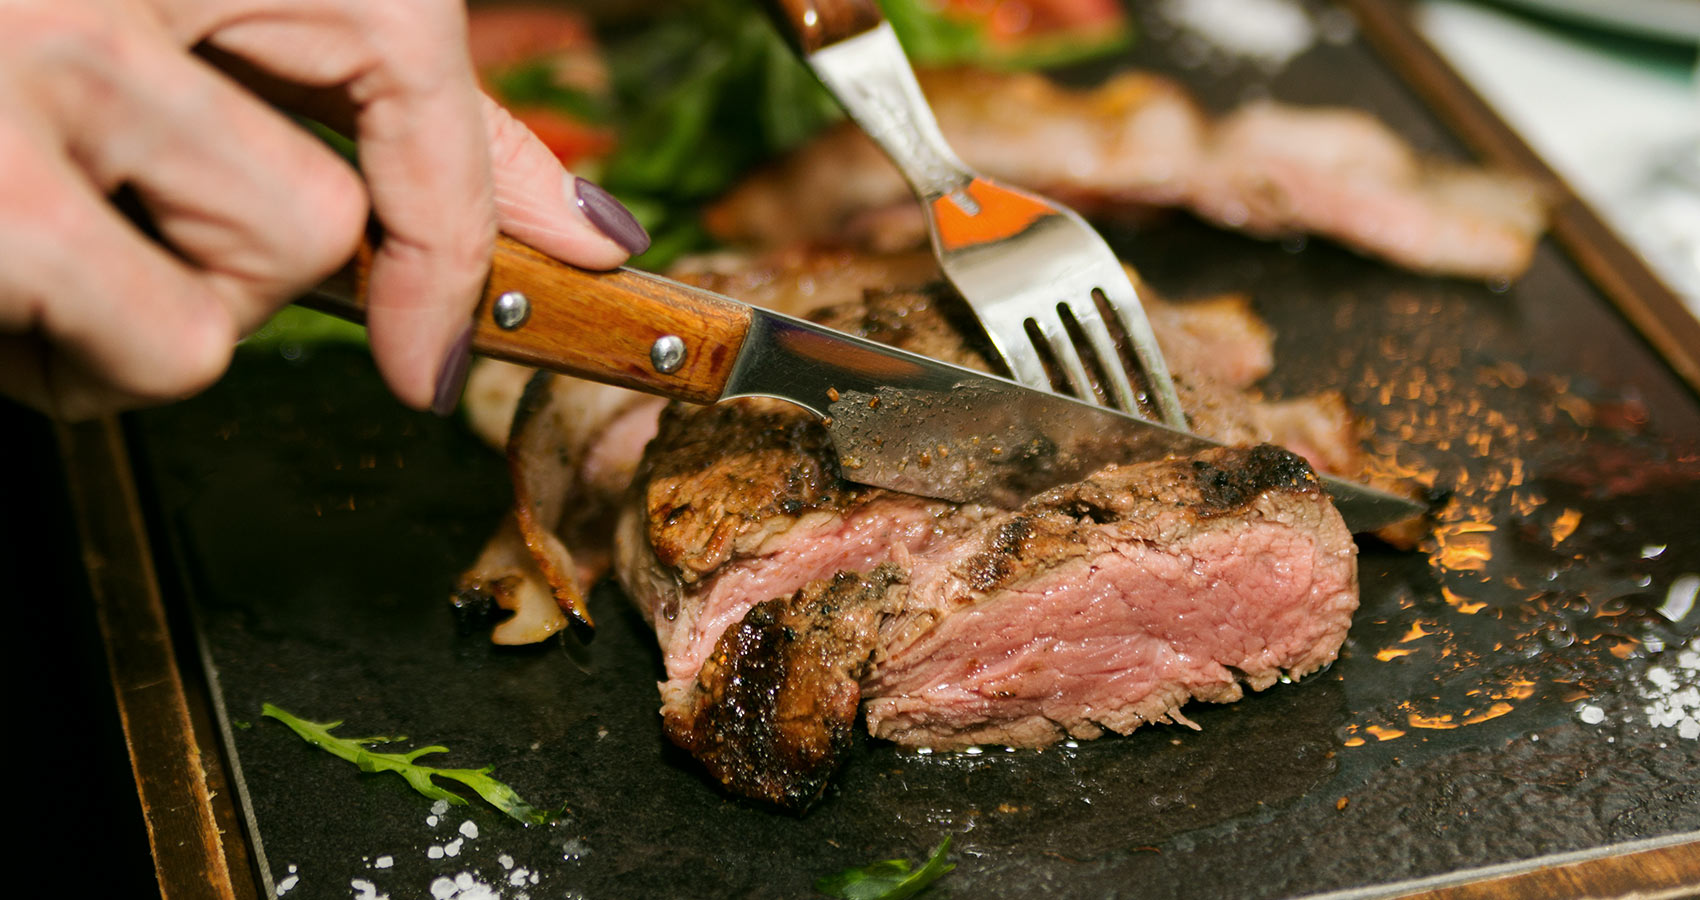 capture the first moment you slice into a steak